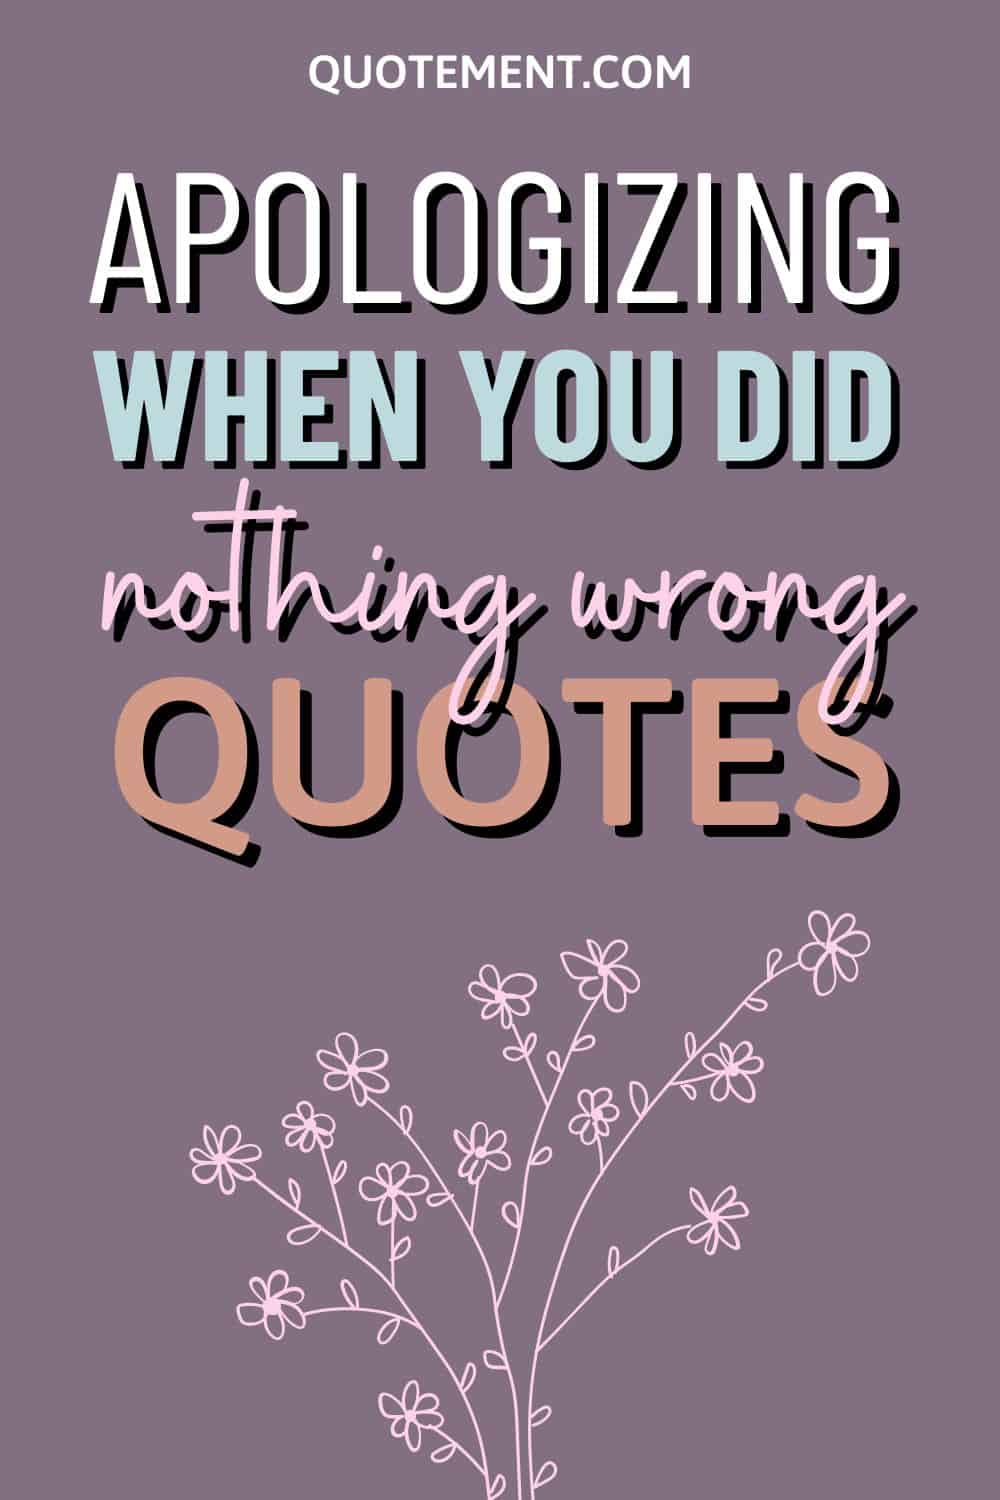 50 Brilliant Apologizing When You Did Nothing Wrong Quotes